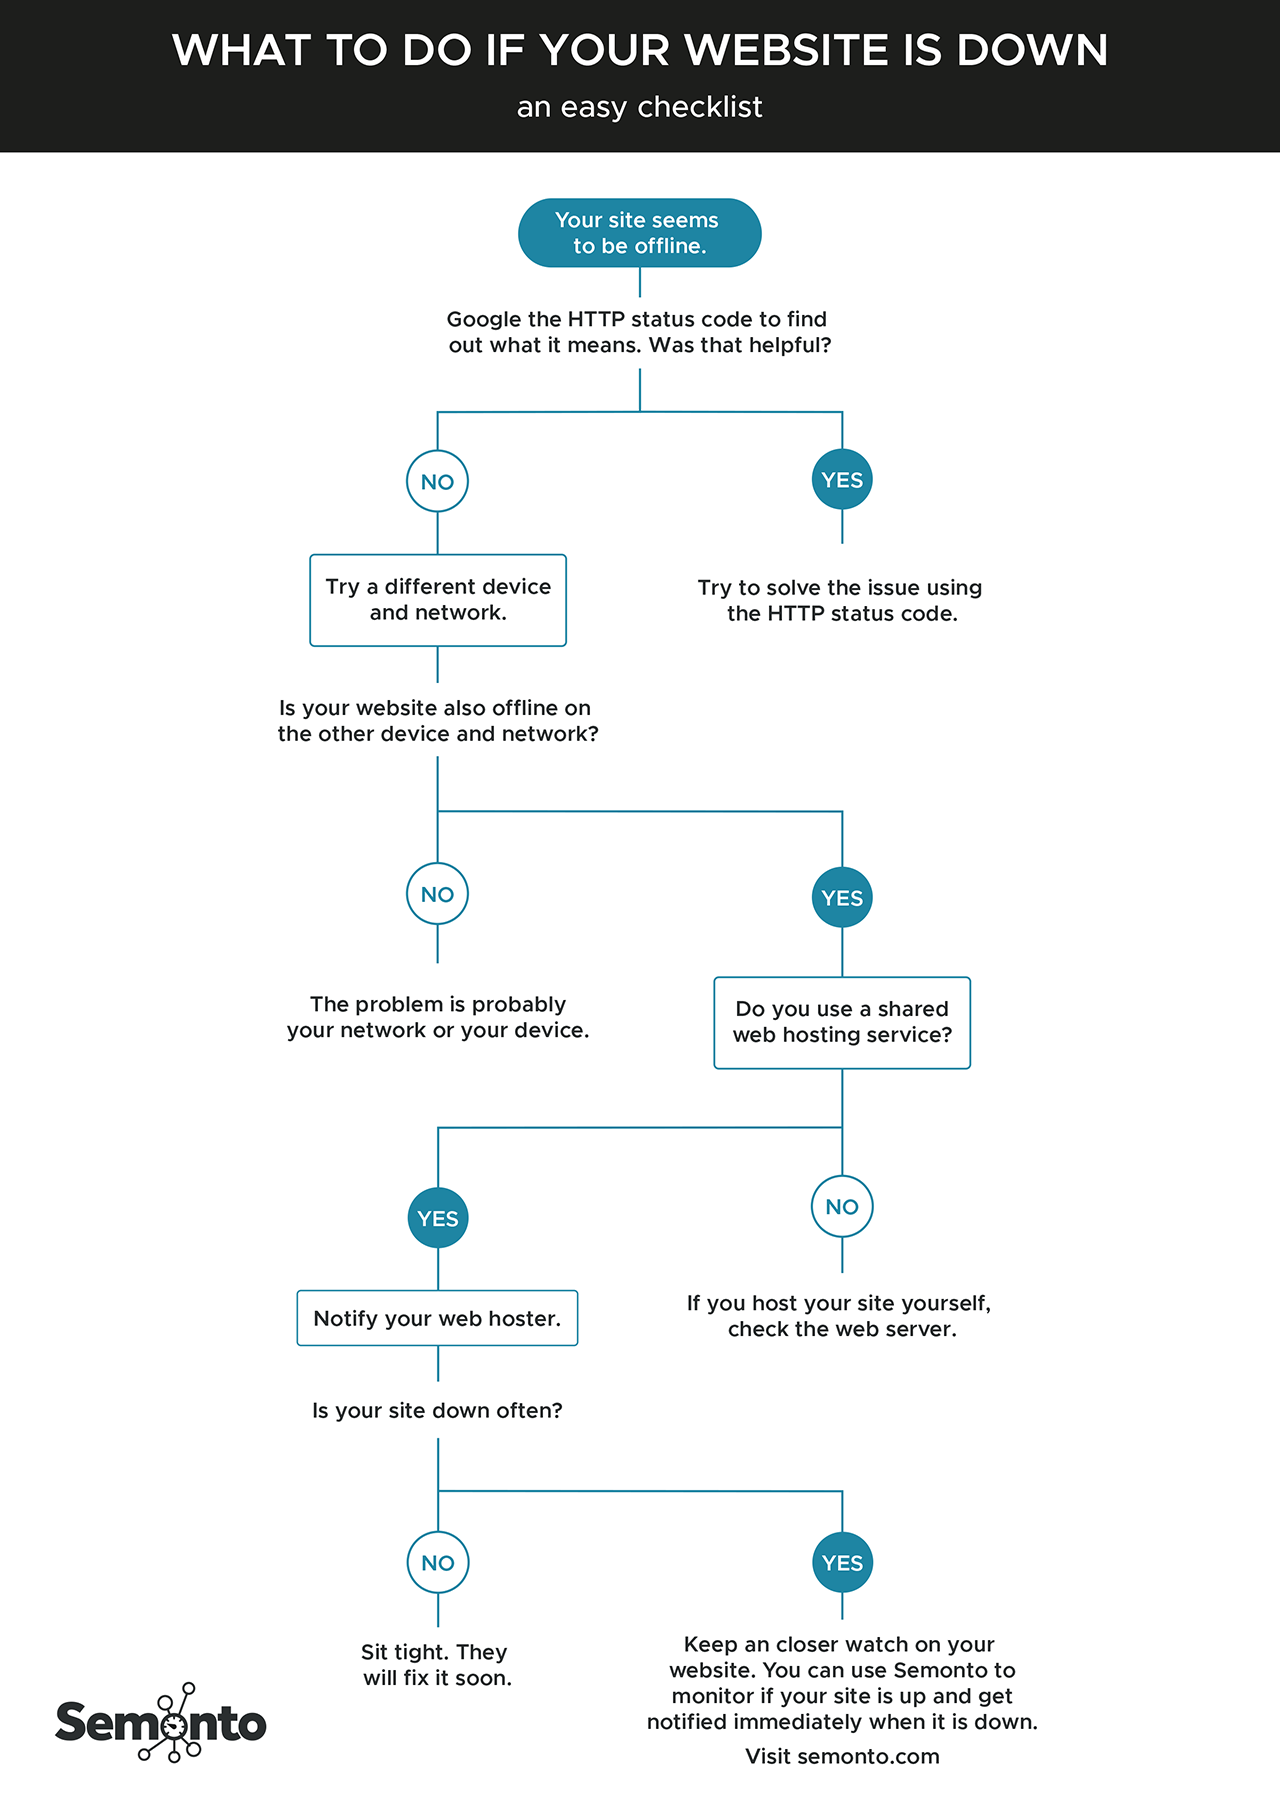 Flow chart that depicts an easy checklists when your site is down